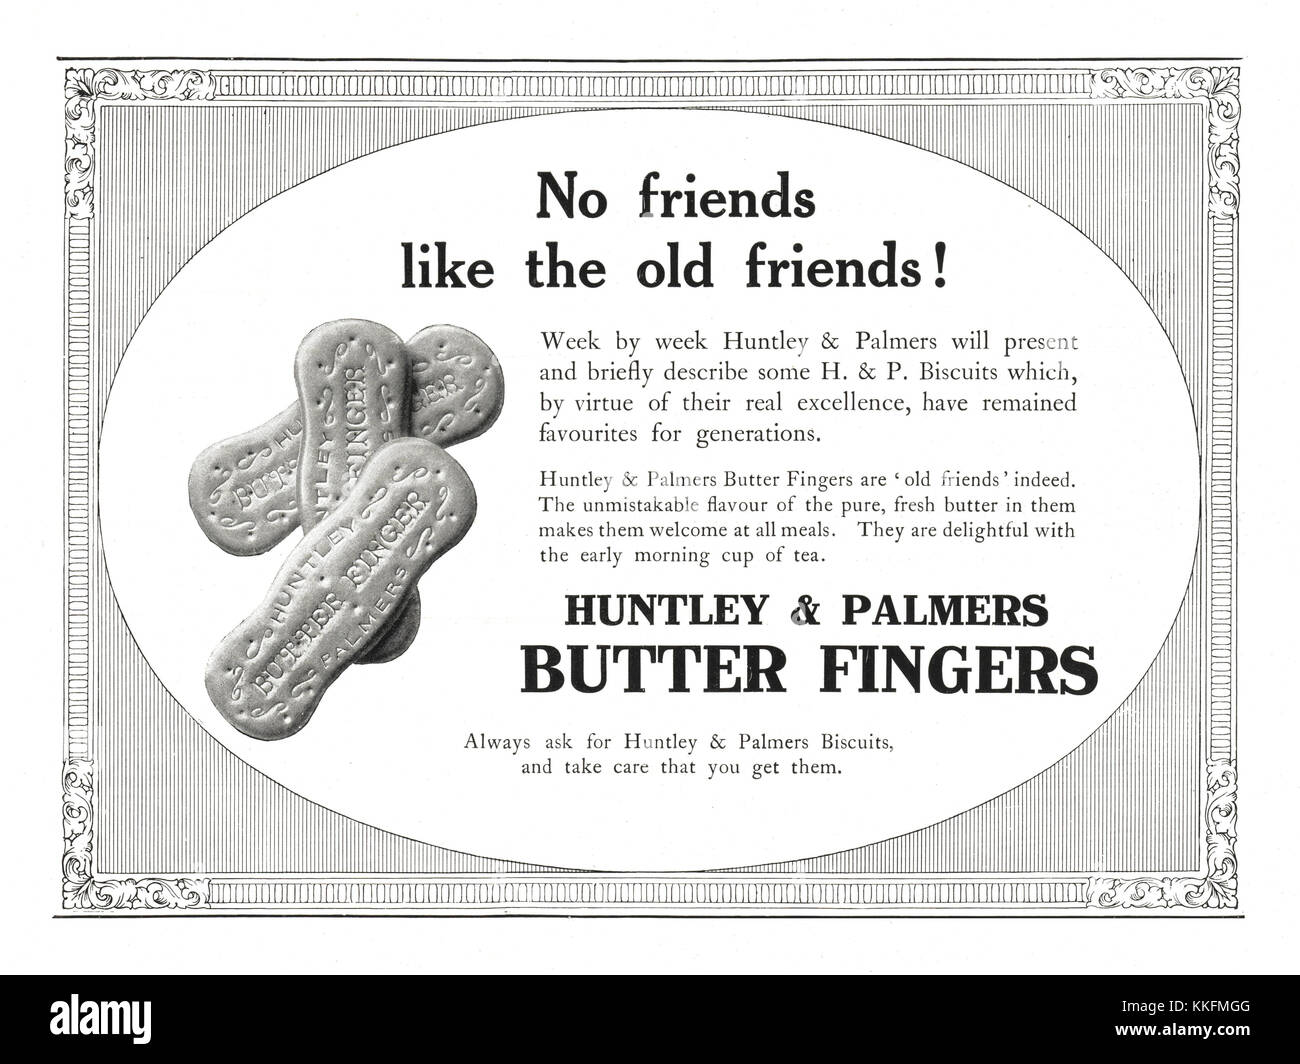 1947 UK Magazine Huntley & Palmers Butter Fingers Biscuits Advert Stock Photo